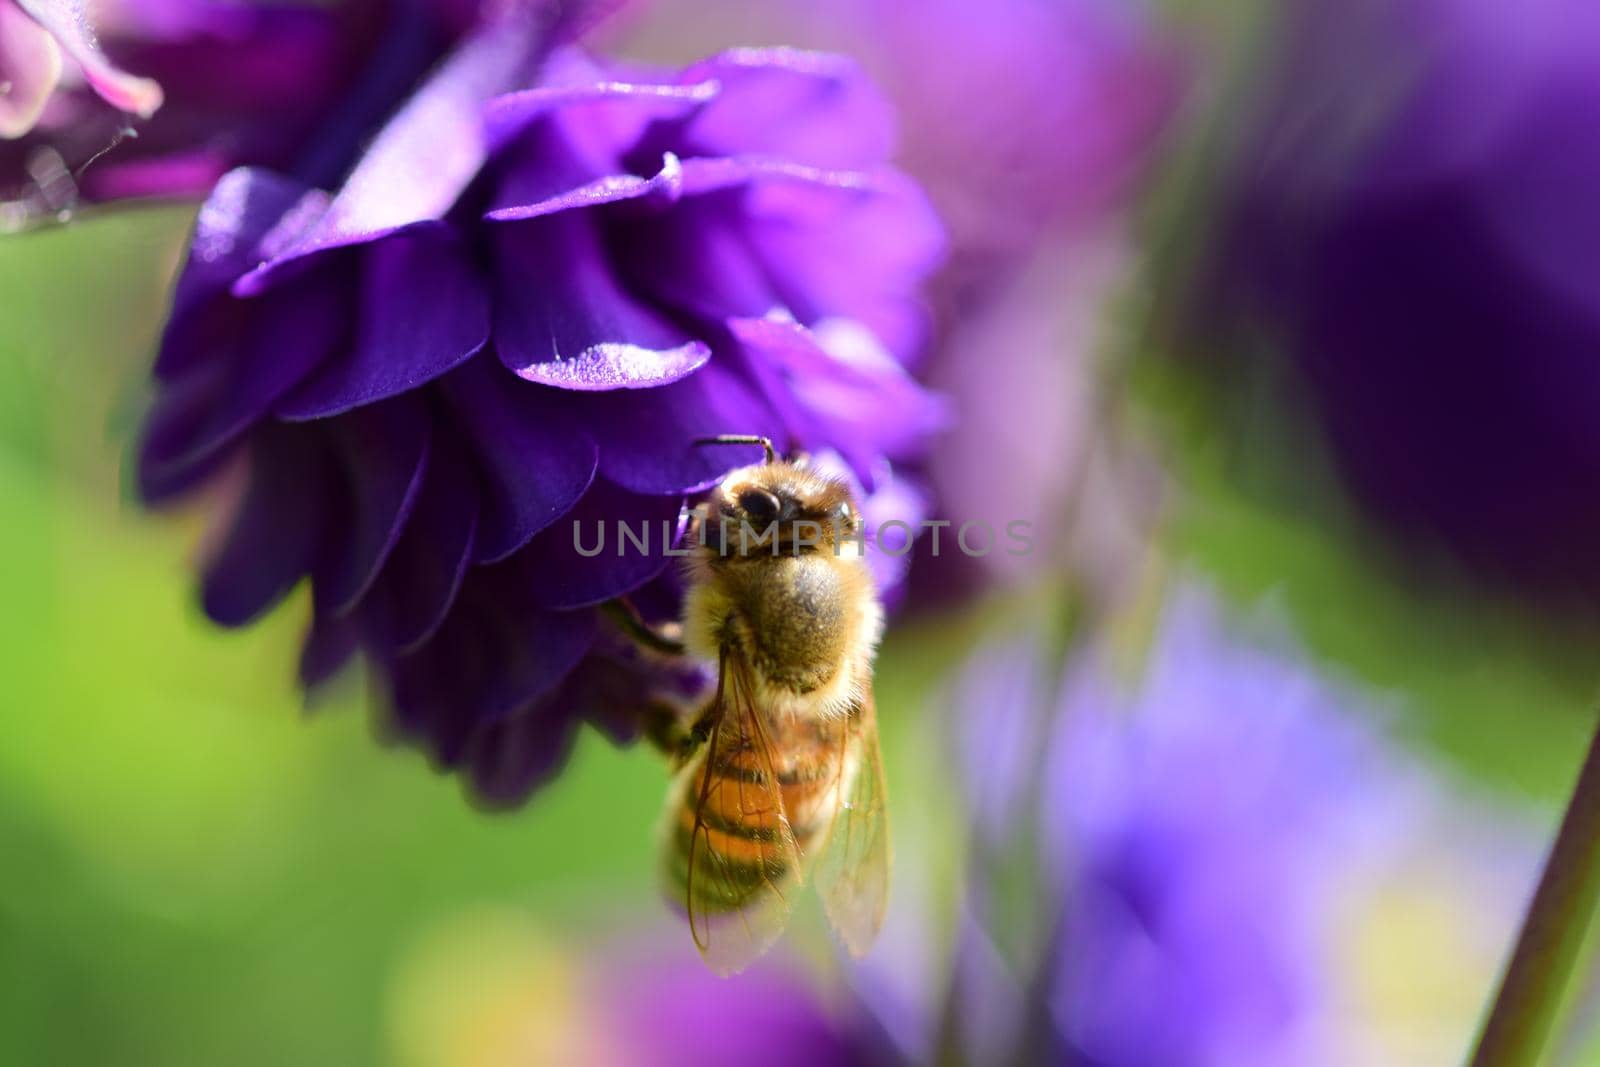 Close up of a honey bee on a purple flower by Luise123